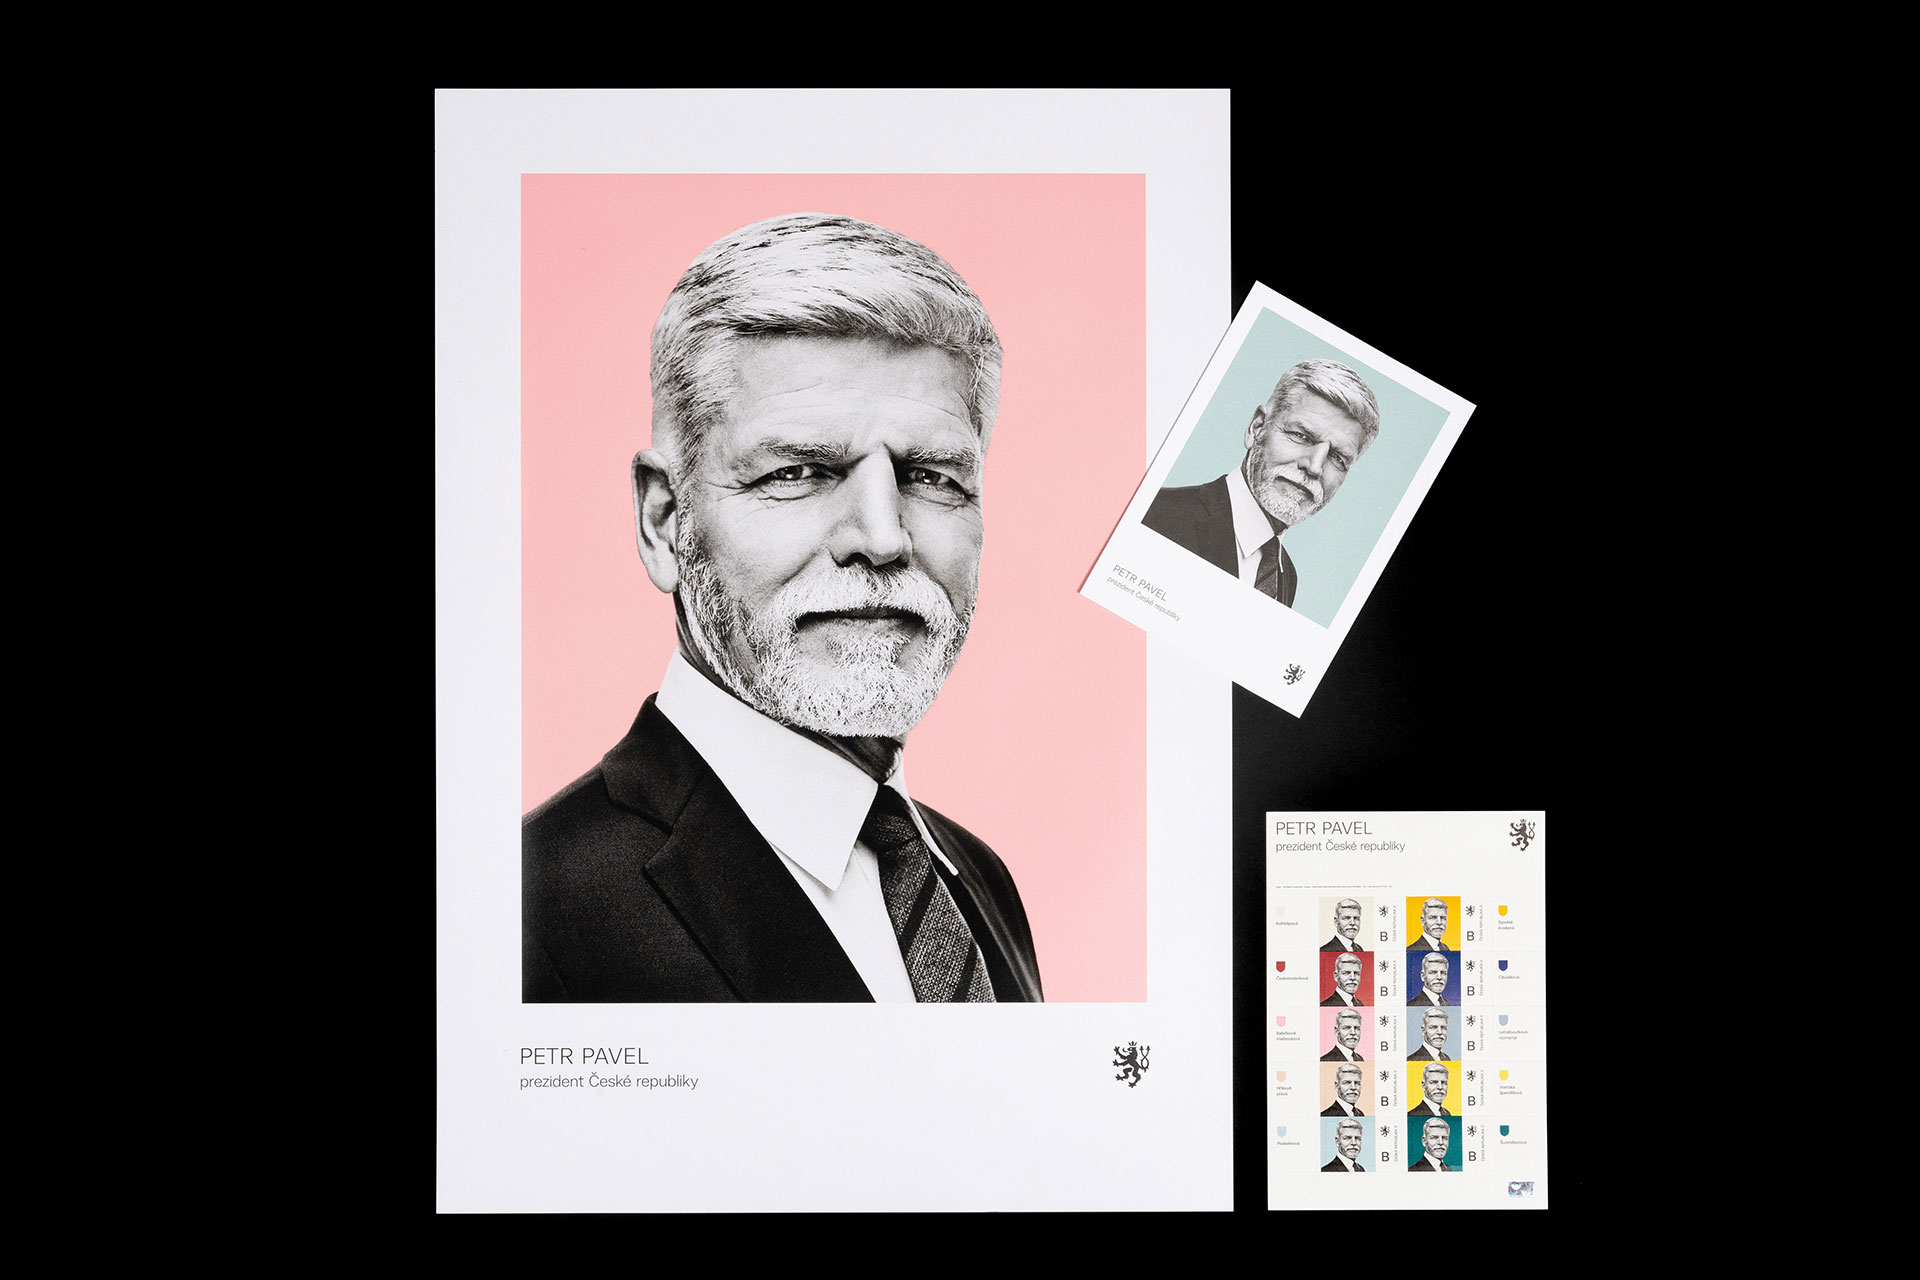 graphic design of official portraits and post stamps for President Petr Pavel (in collaboration with President Petr Pavel’s creative team)